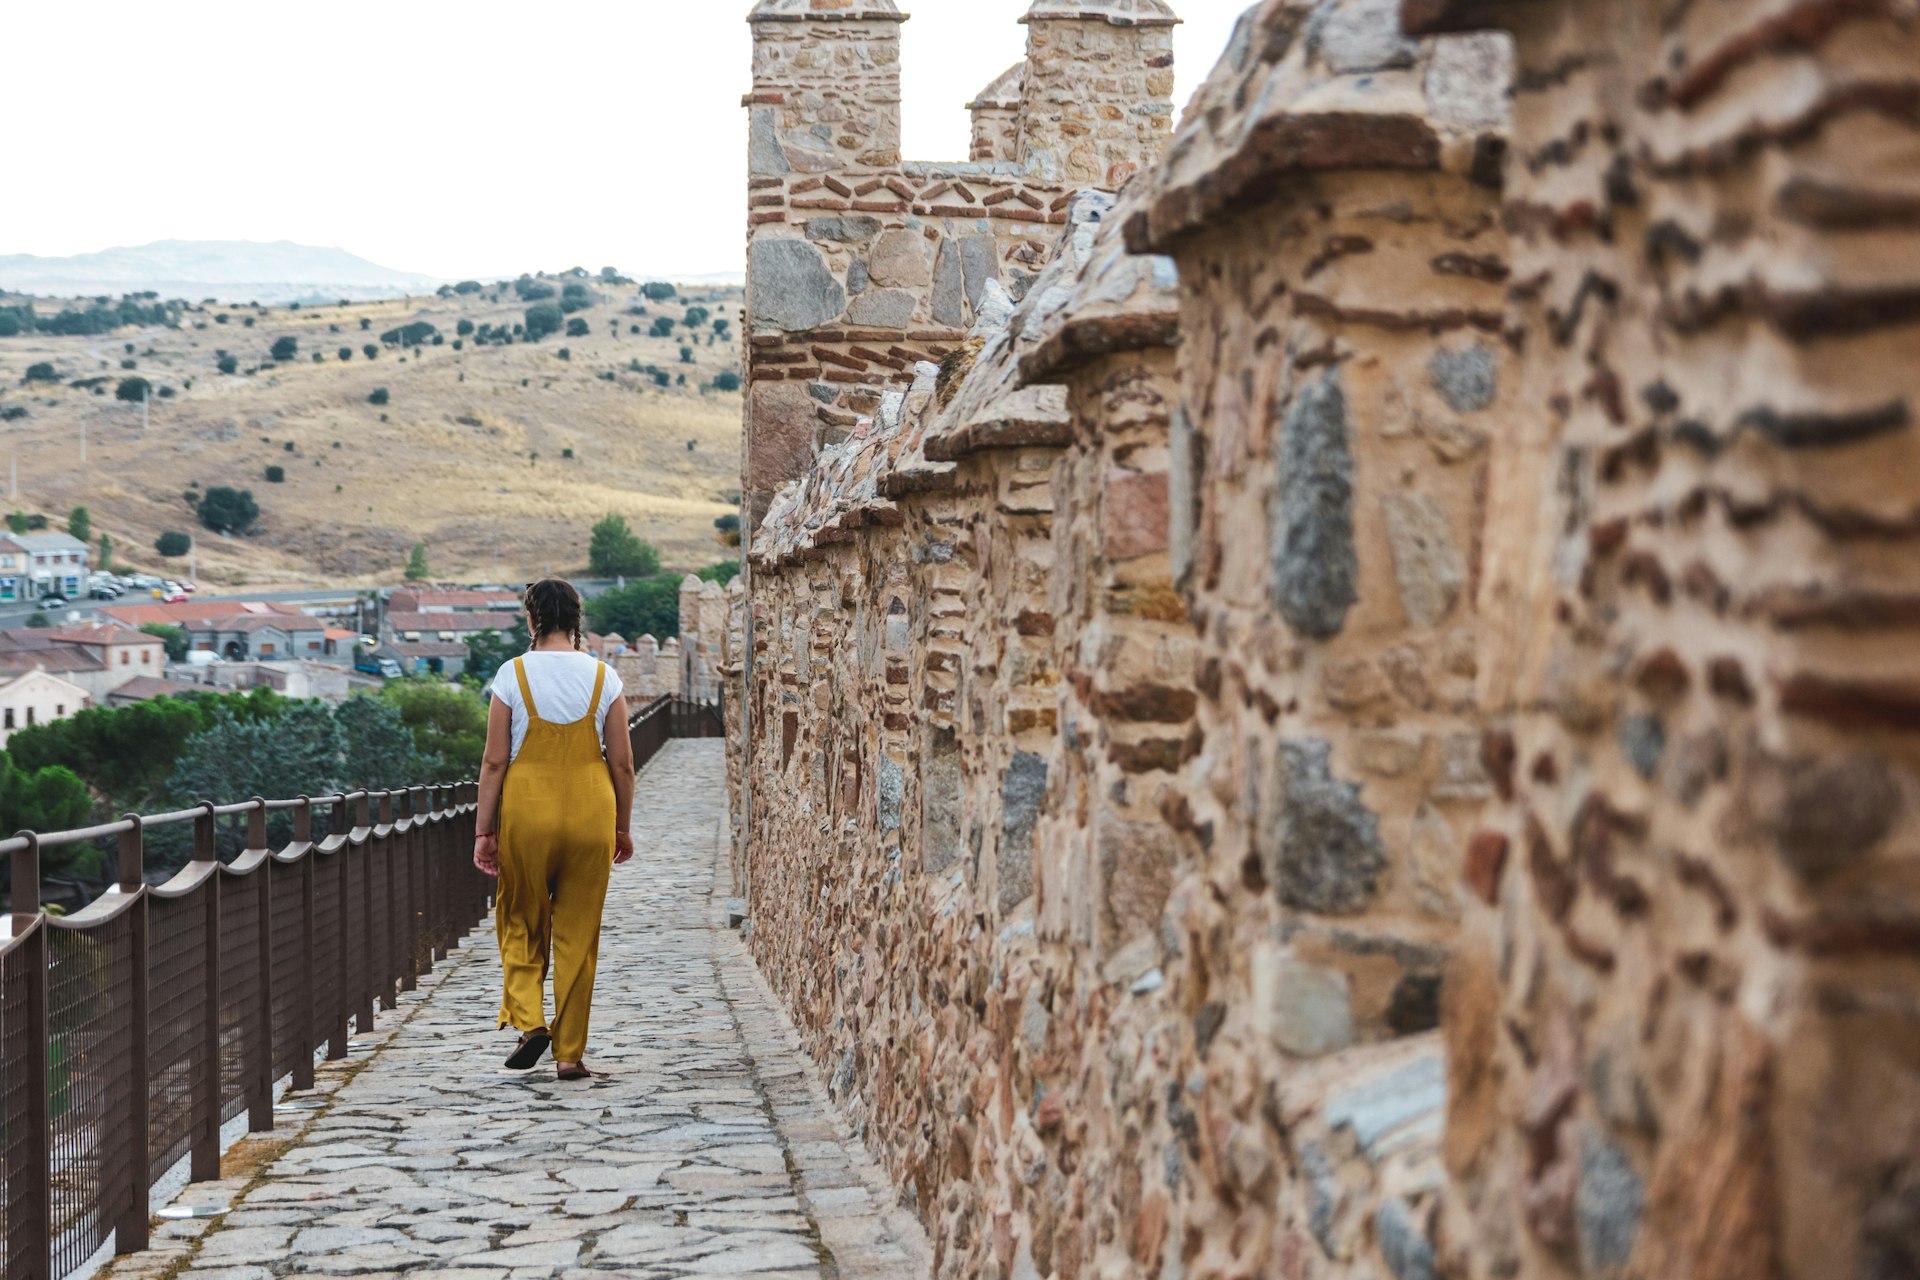 Young woman in dungarees walking along the medieval city walls of Avila